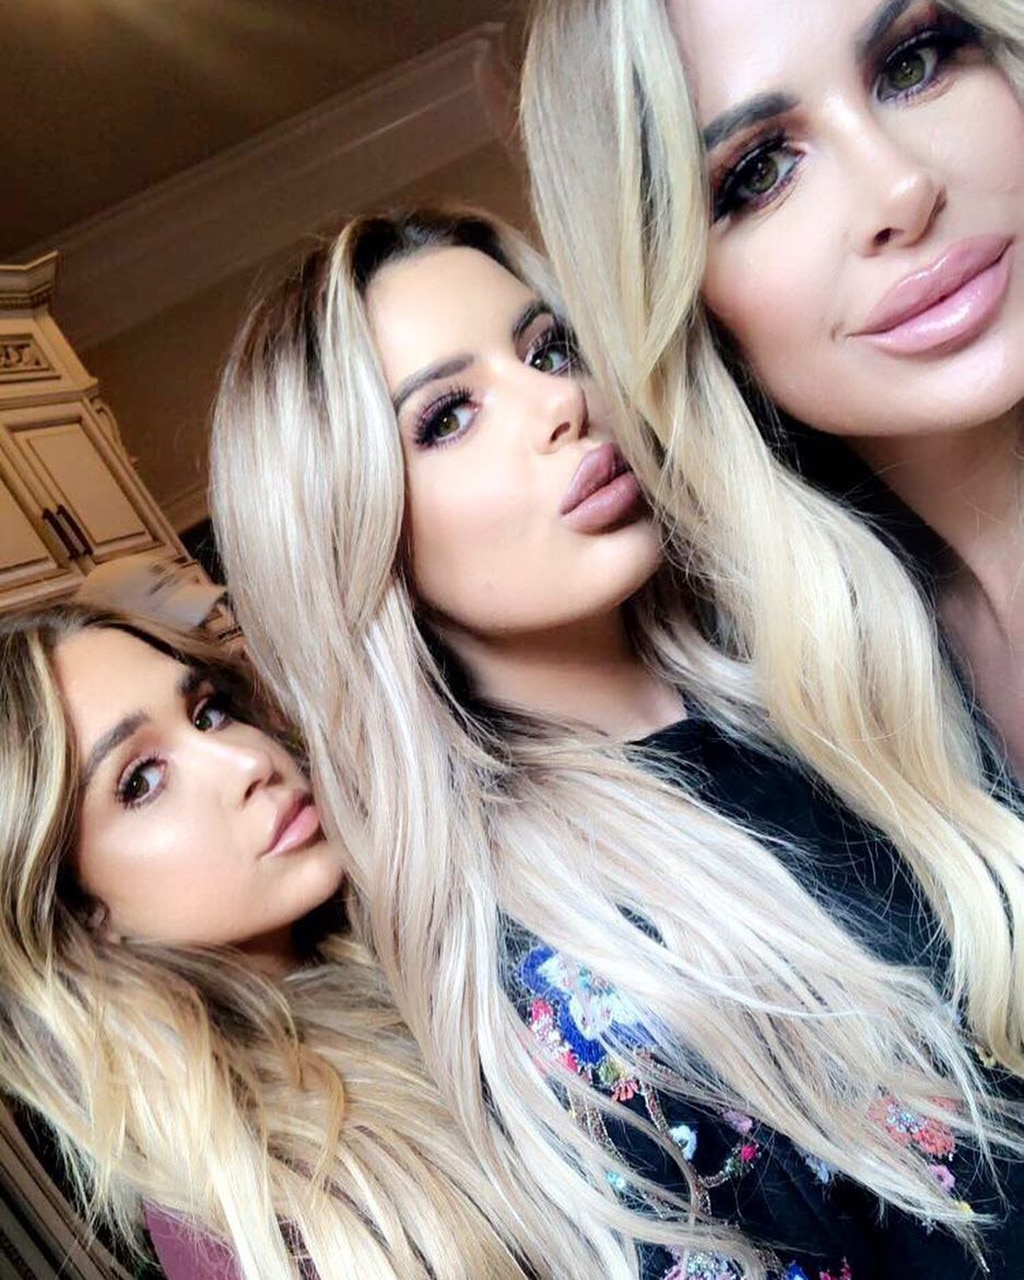 Carbon Copies From See Kim Zolciak Biermann Twin With Daughters Brielle